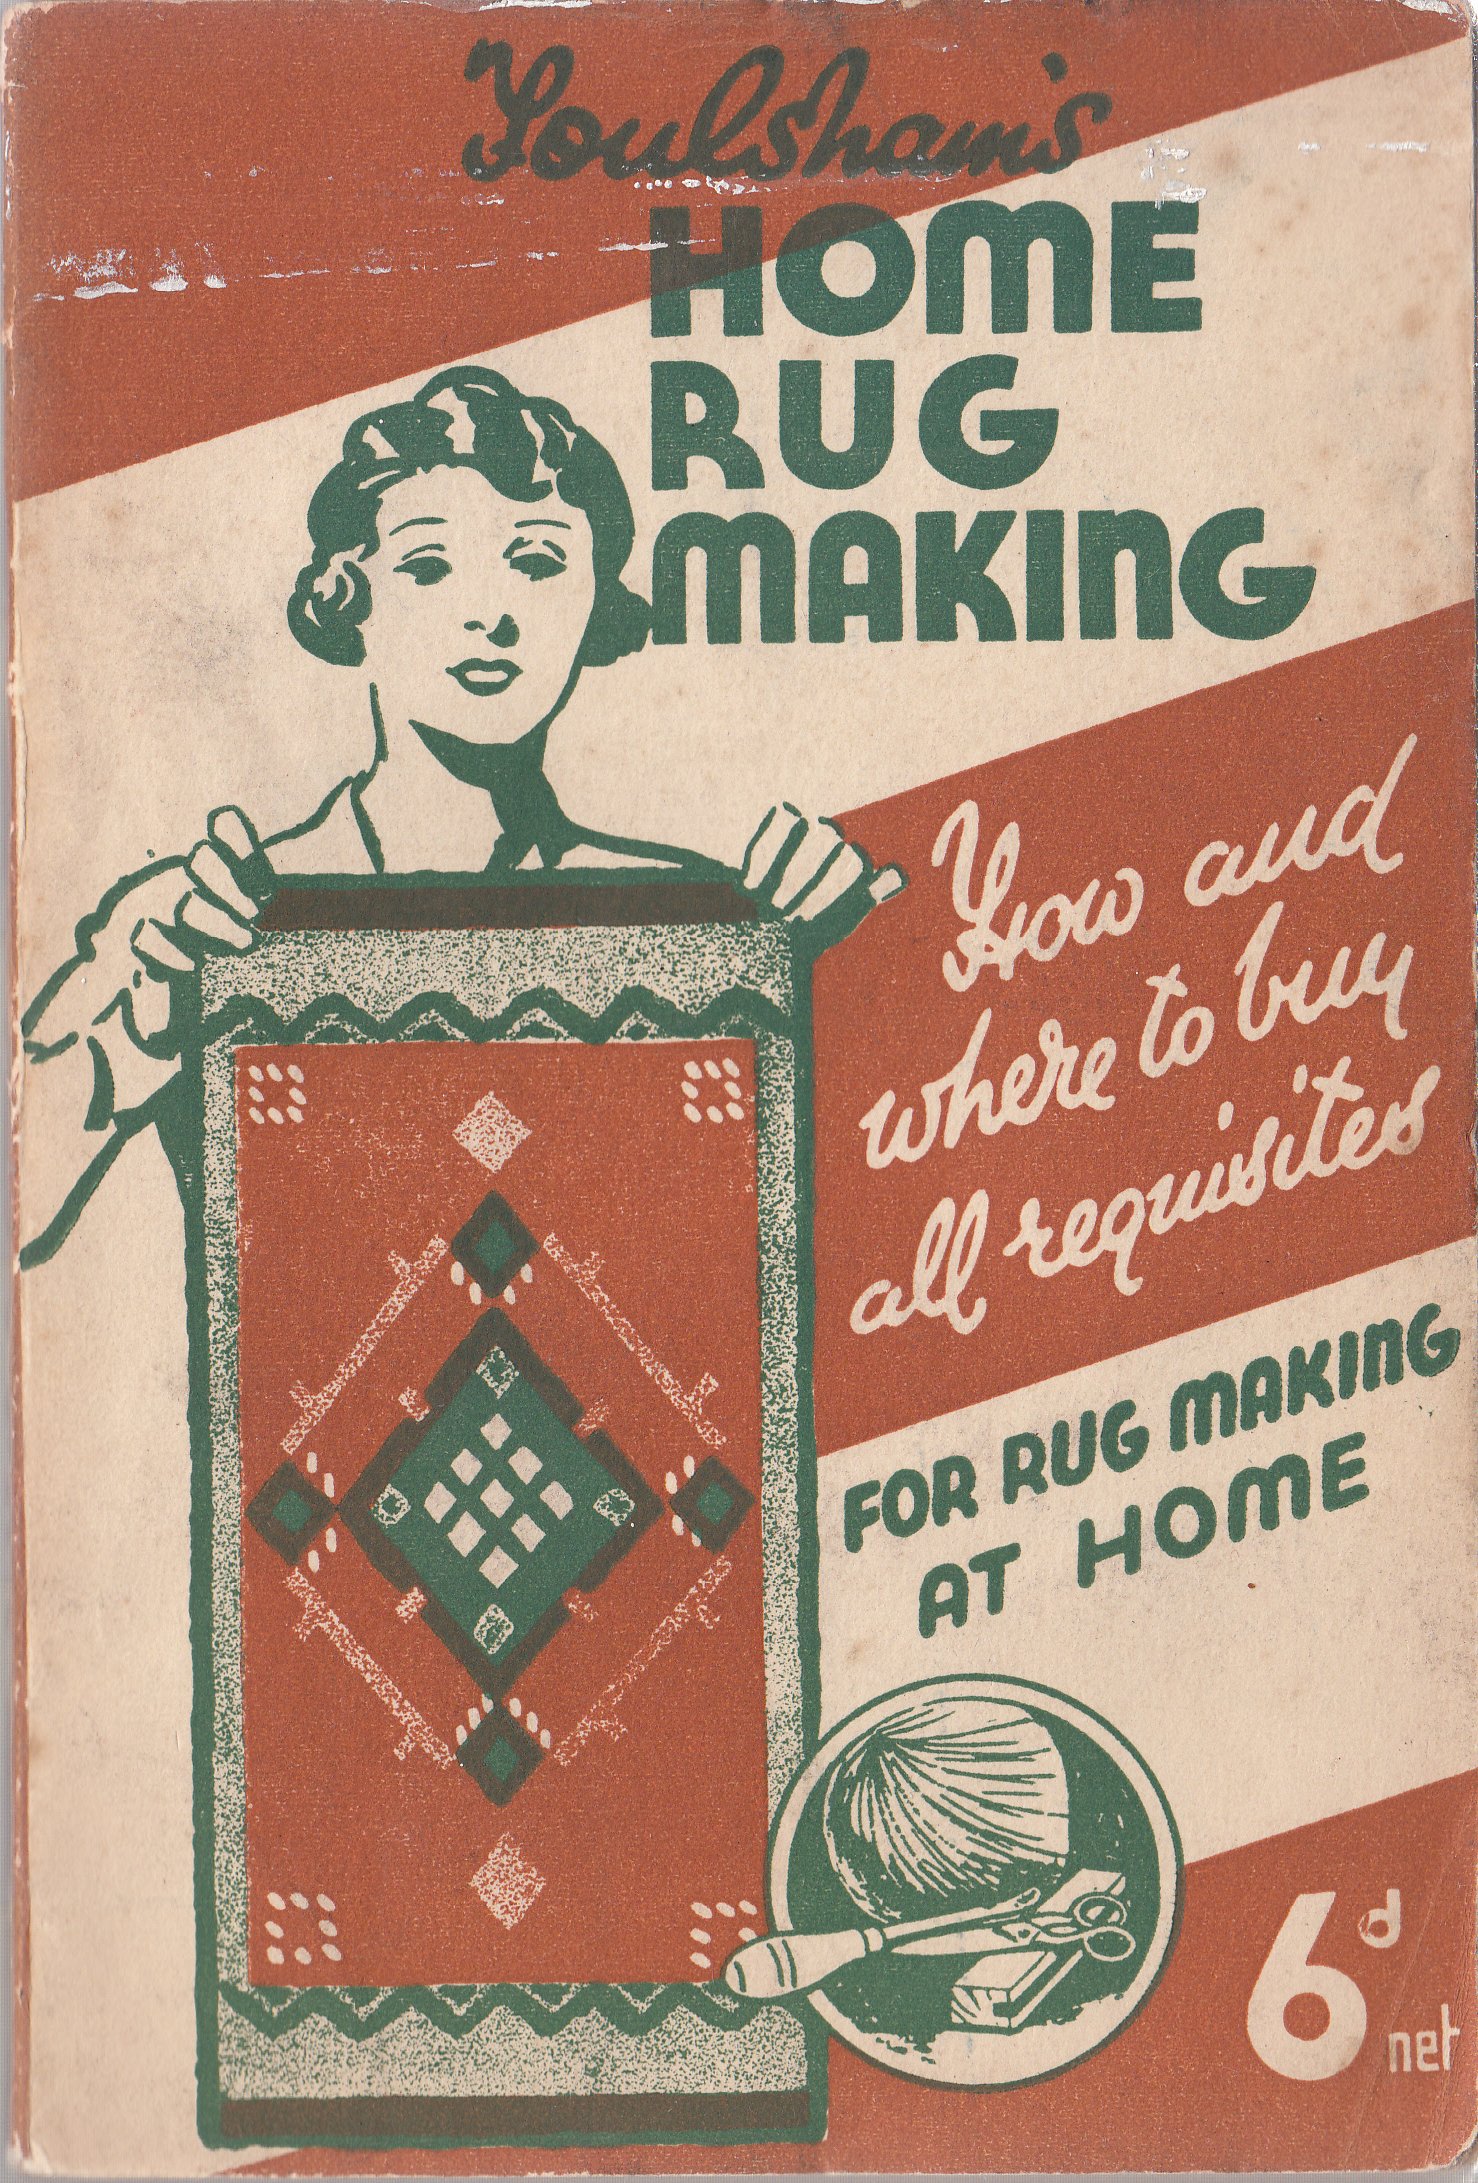 RUGS - HOME RUG MAKING By Mary Graham (c.1930)